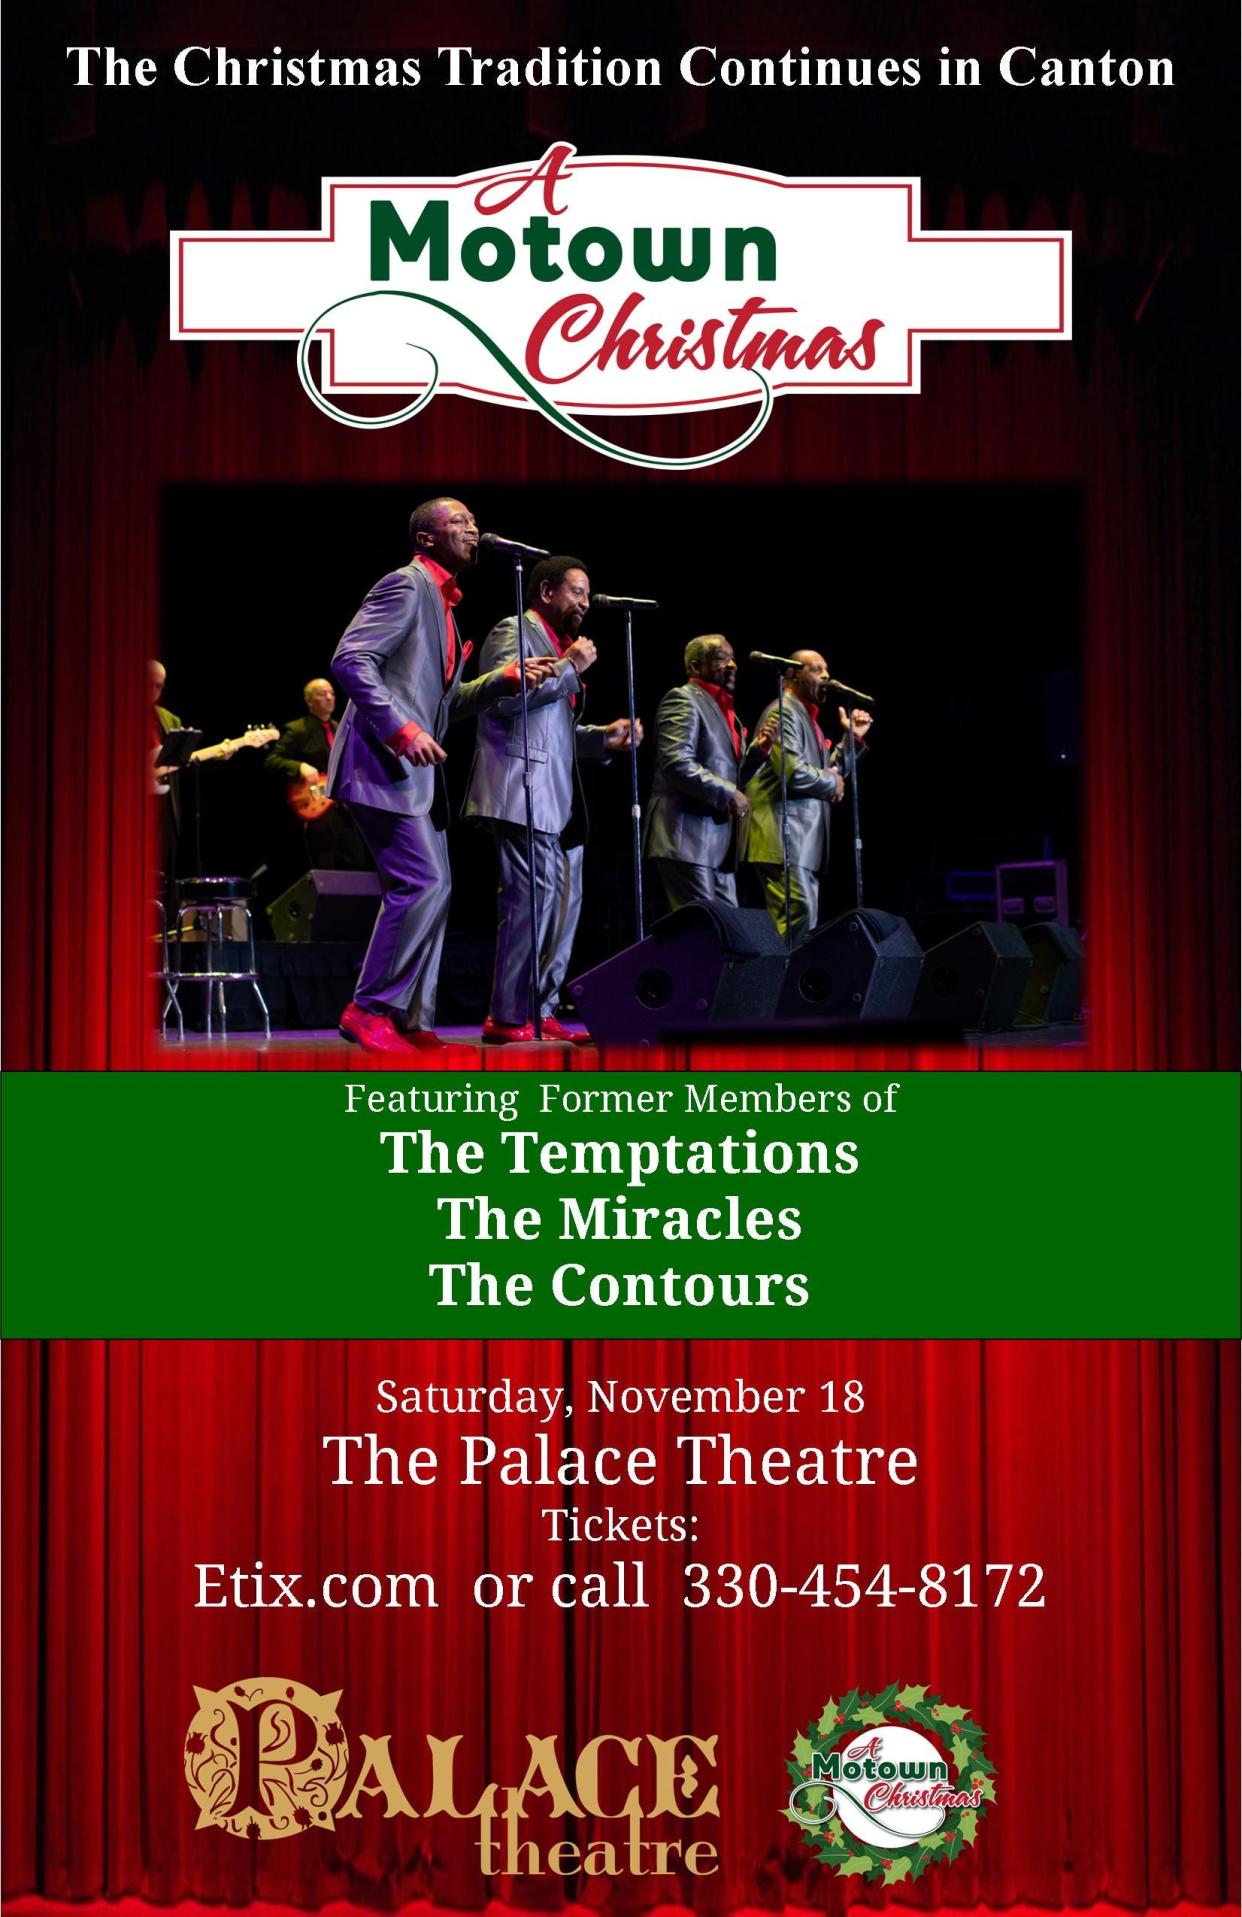 A Motown Christmas will feature performances on Nov. 18 at Canton Palace Theatre by a vocal group consisting of past and present members of The Temptations, The Miracles and The Contours.